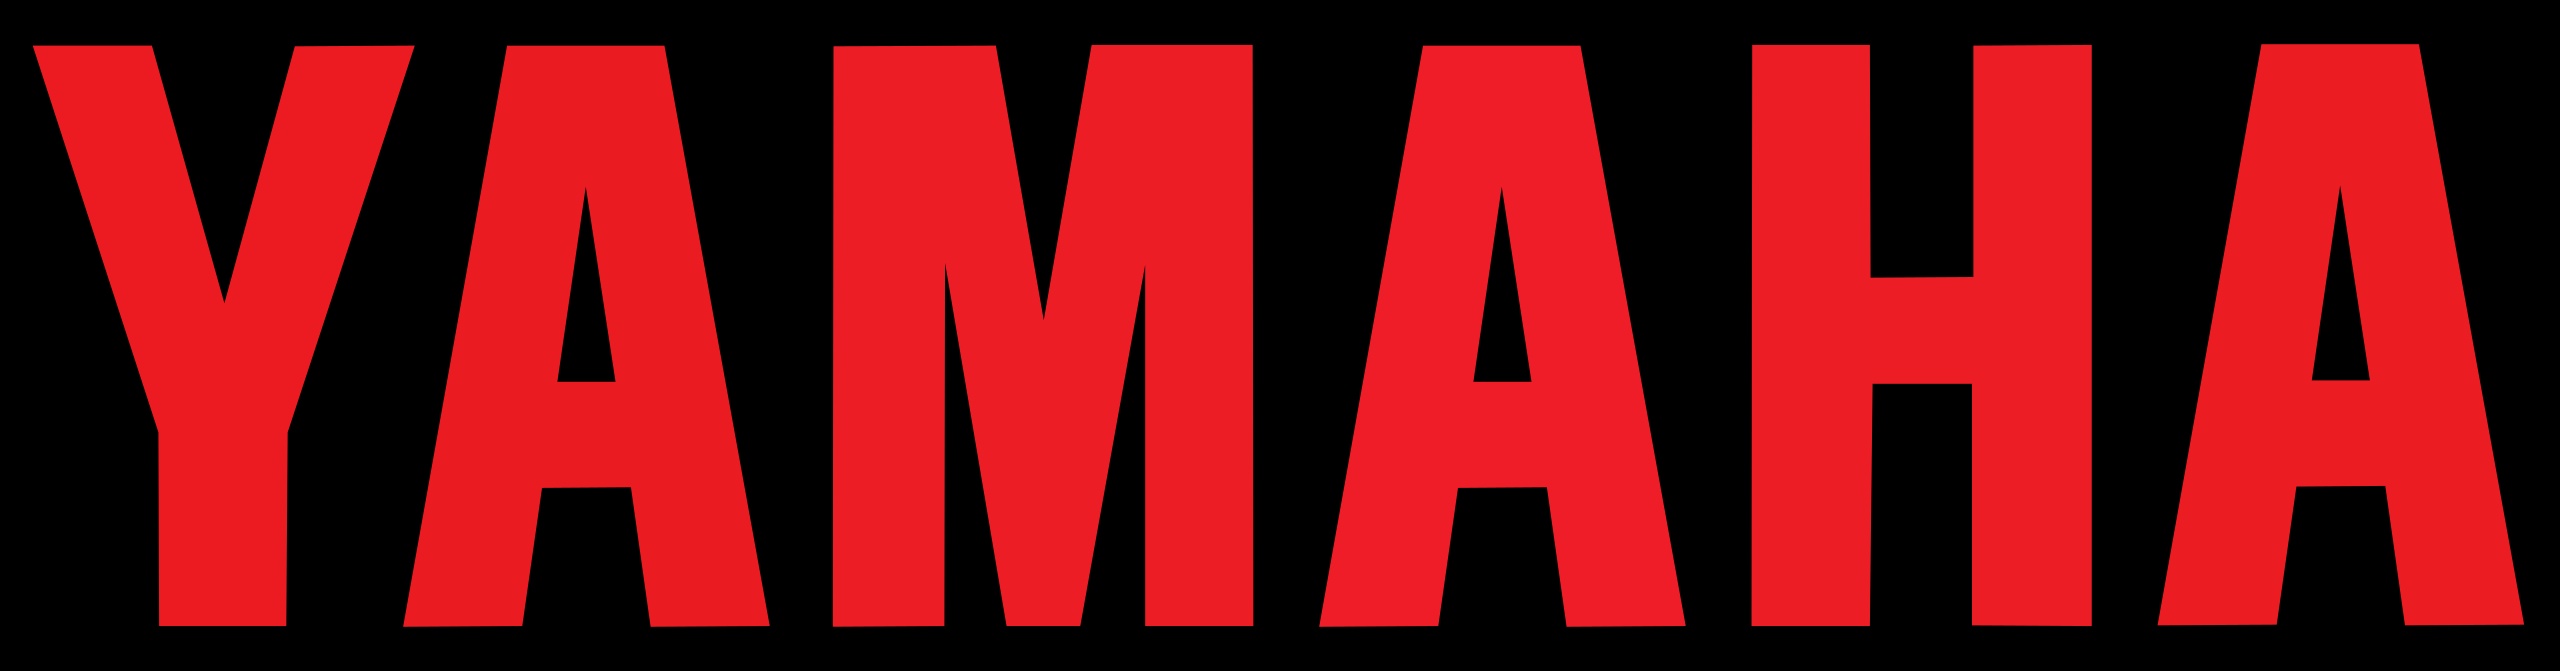 The image displays the red logo of Yamaha.